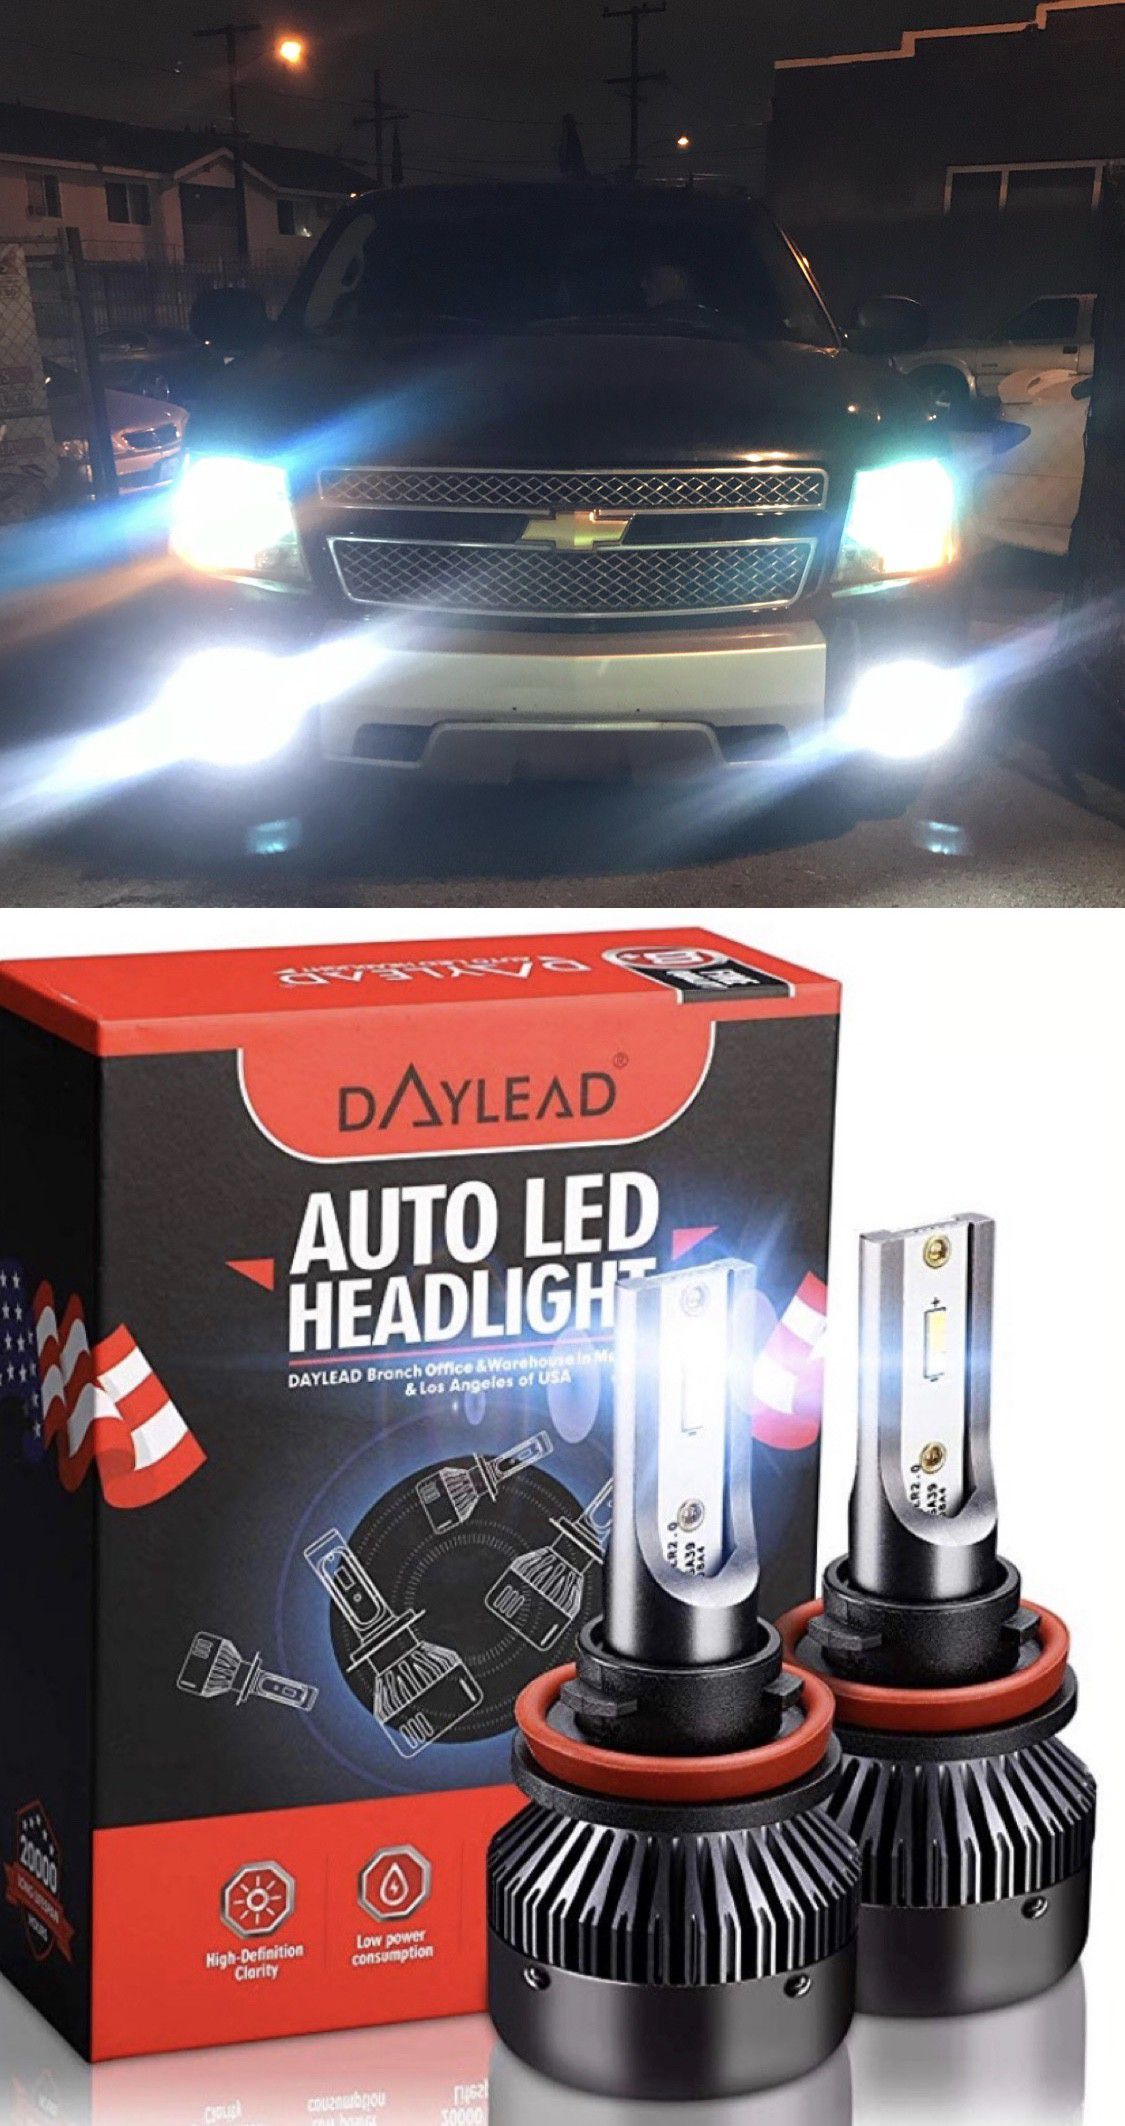 Us brand Daylead LEDs 1 year warranty 25$ plug and play free license plate LEDs with purchase